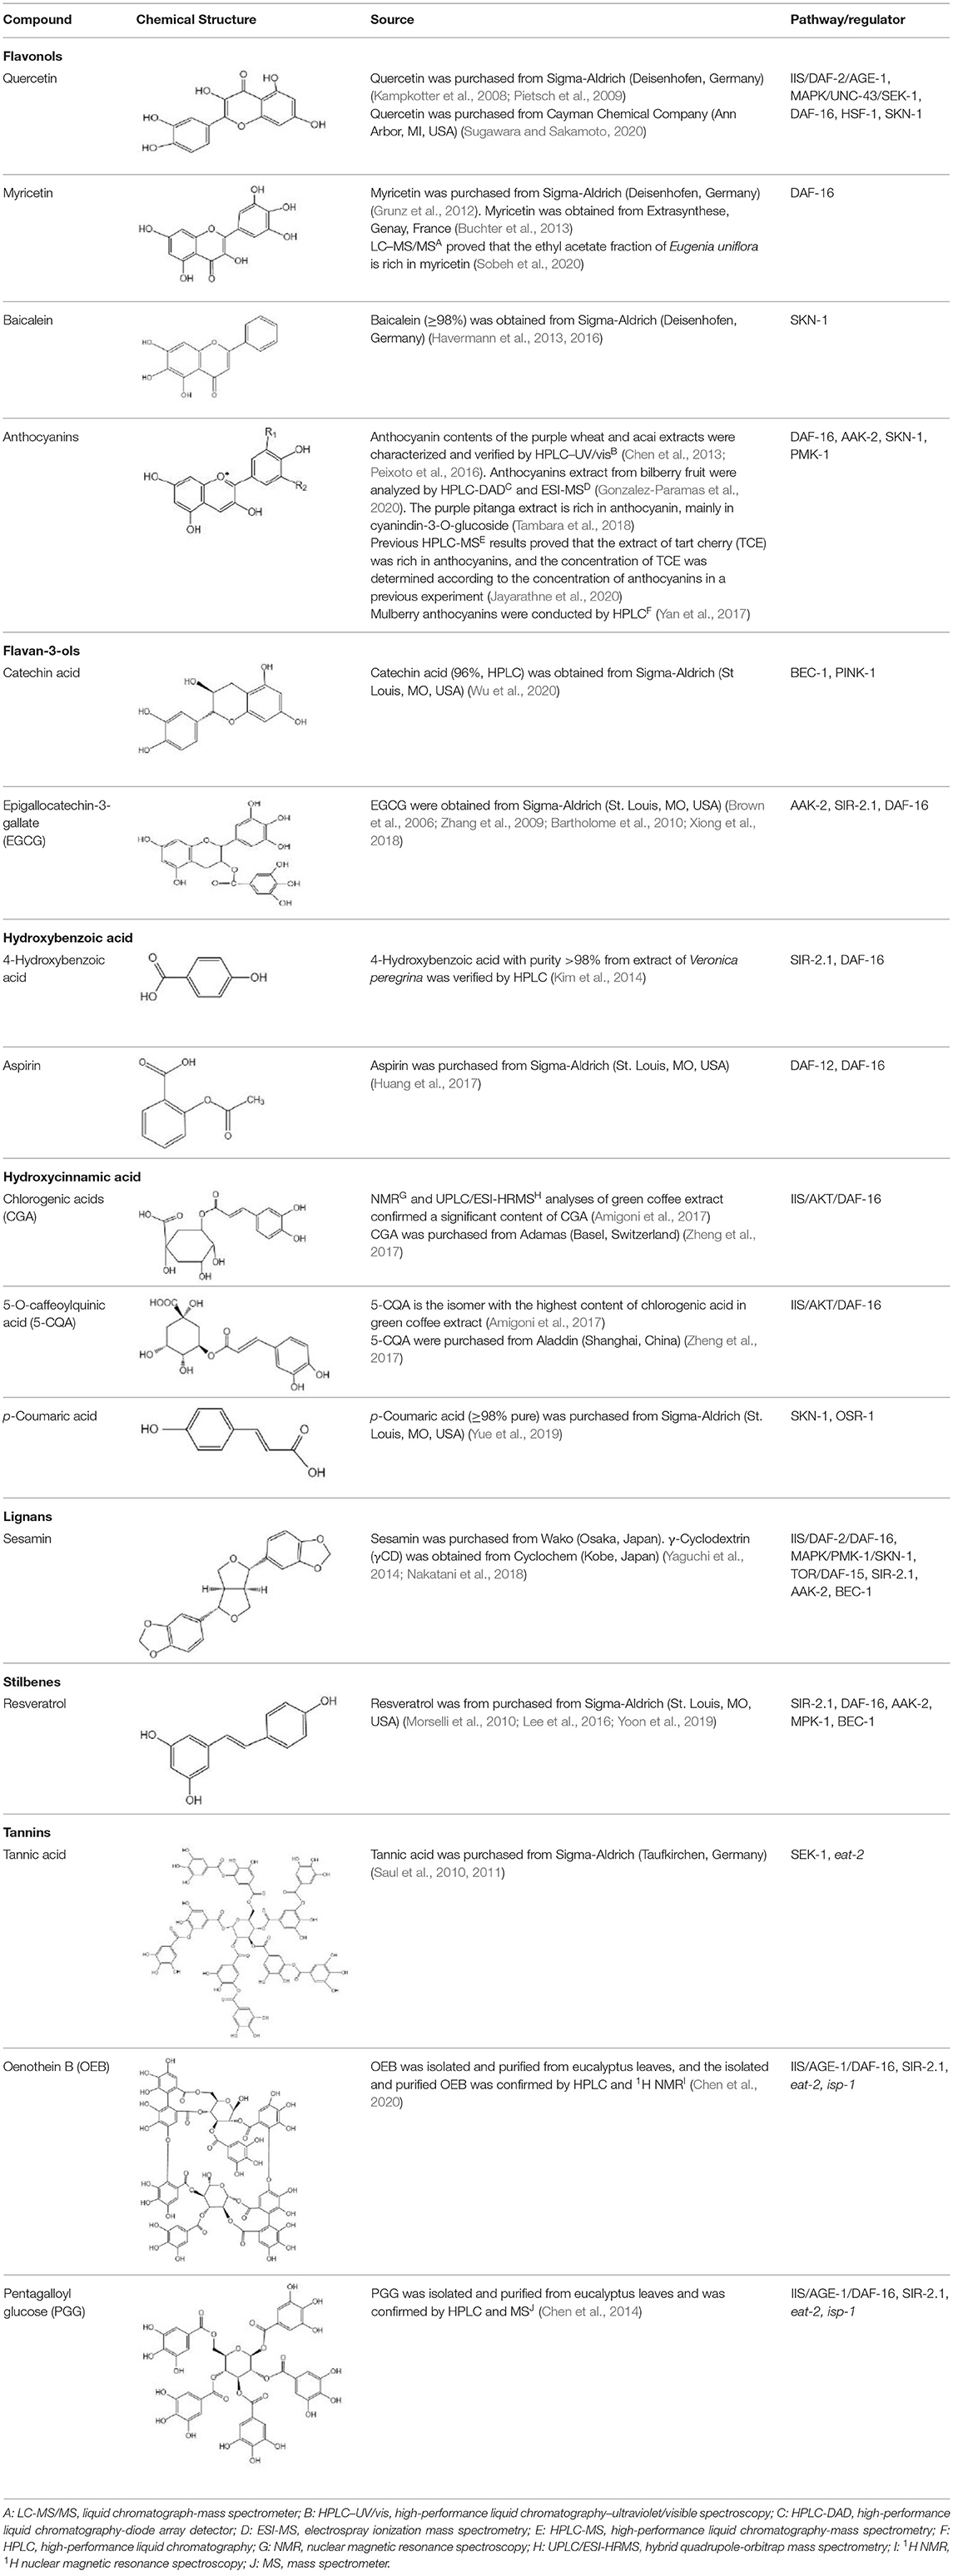 Frontiers | The Review of Anti-aging Mechanism of Polyphenols on ...